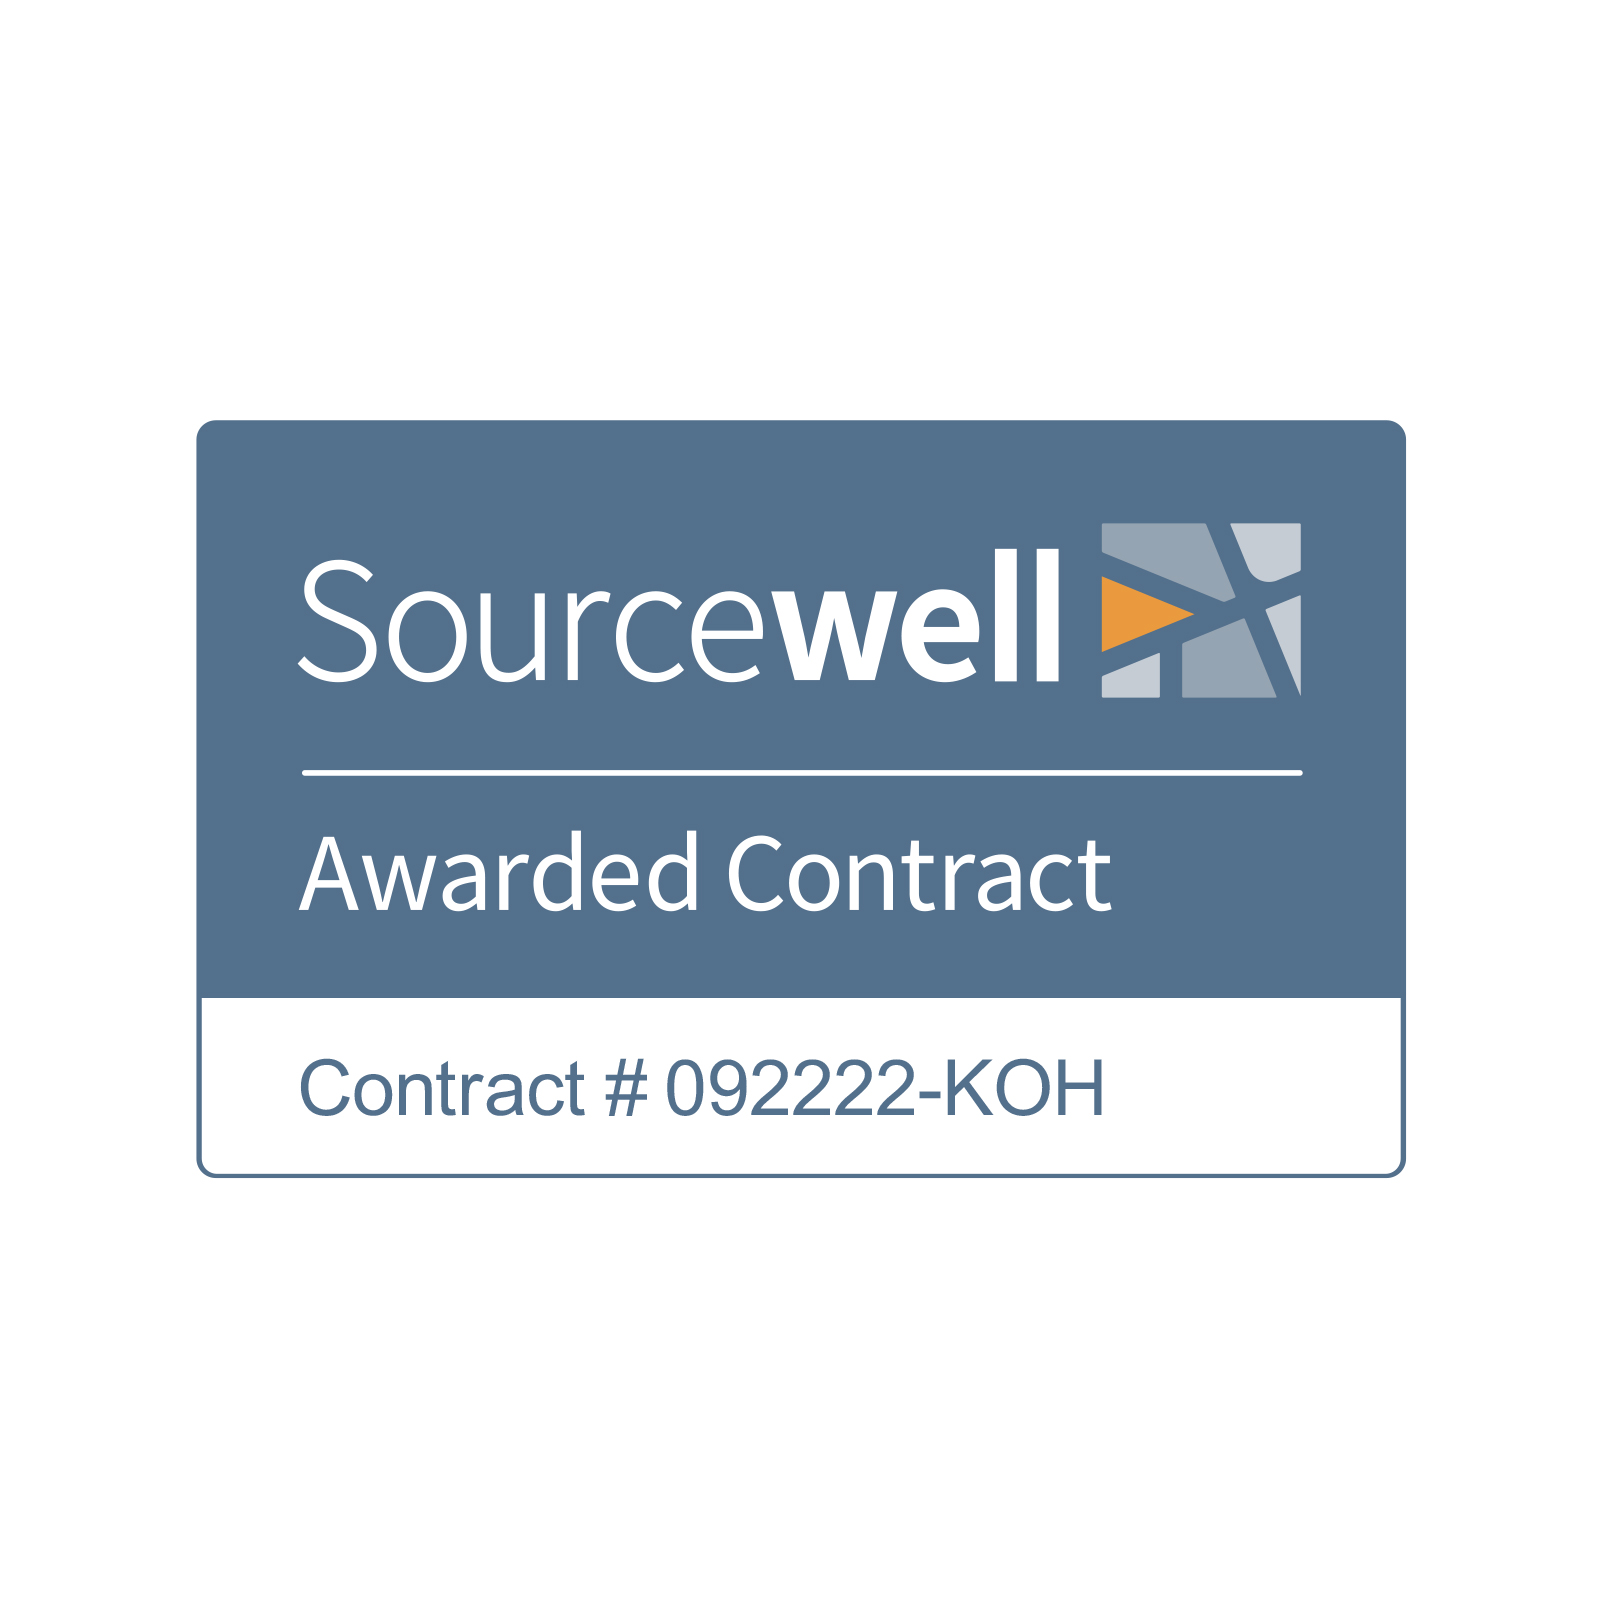 What Is Sourcewell?